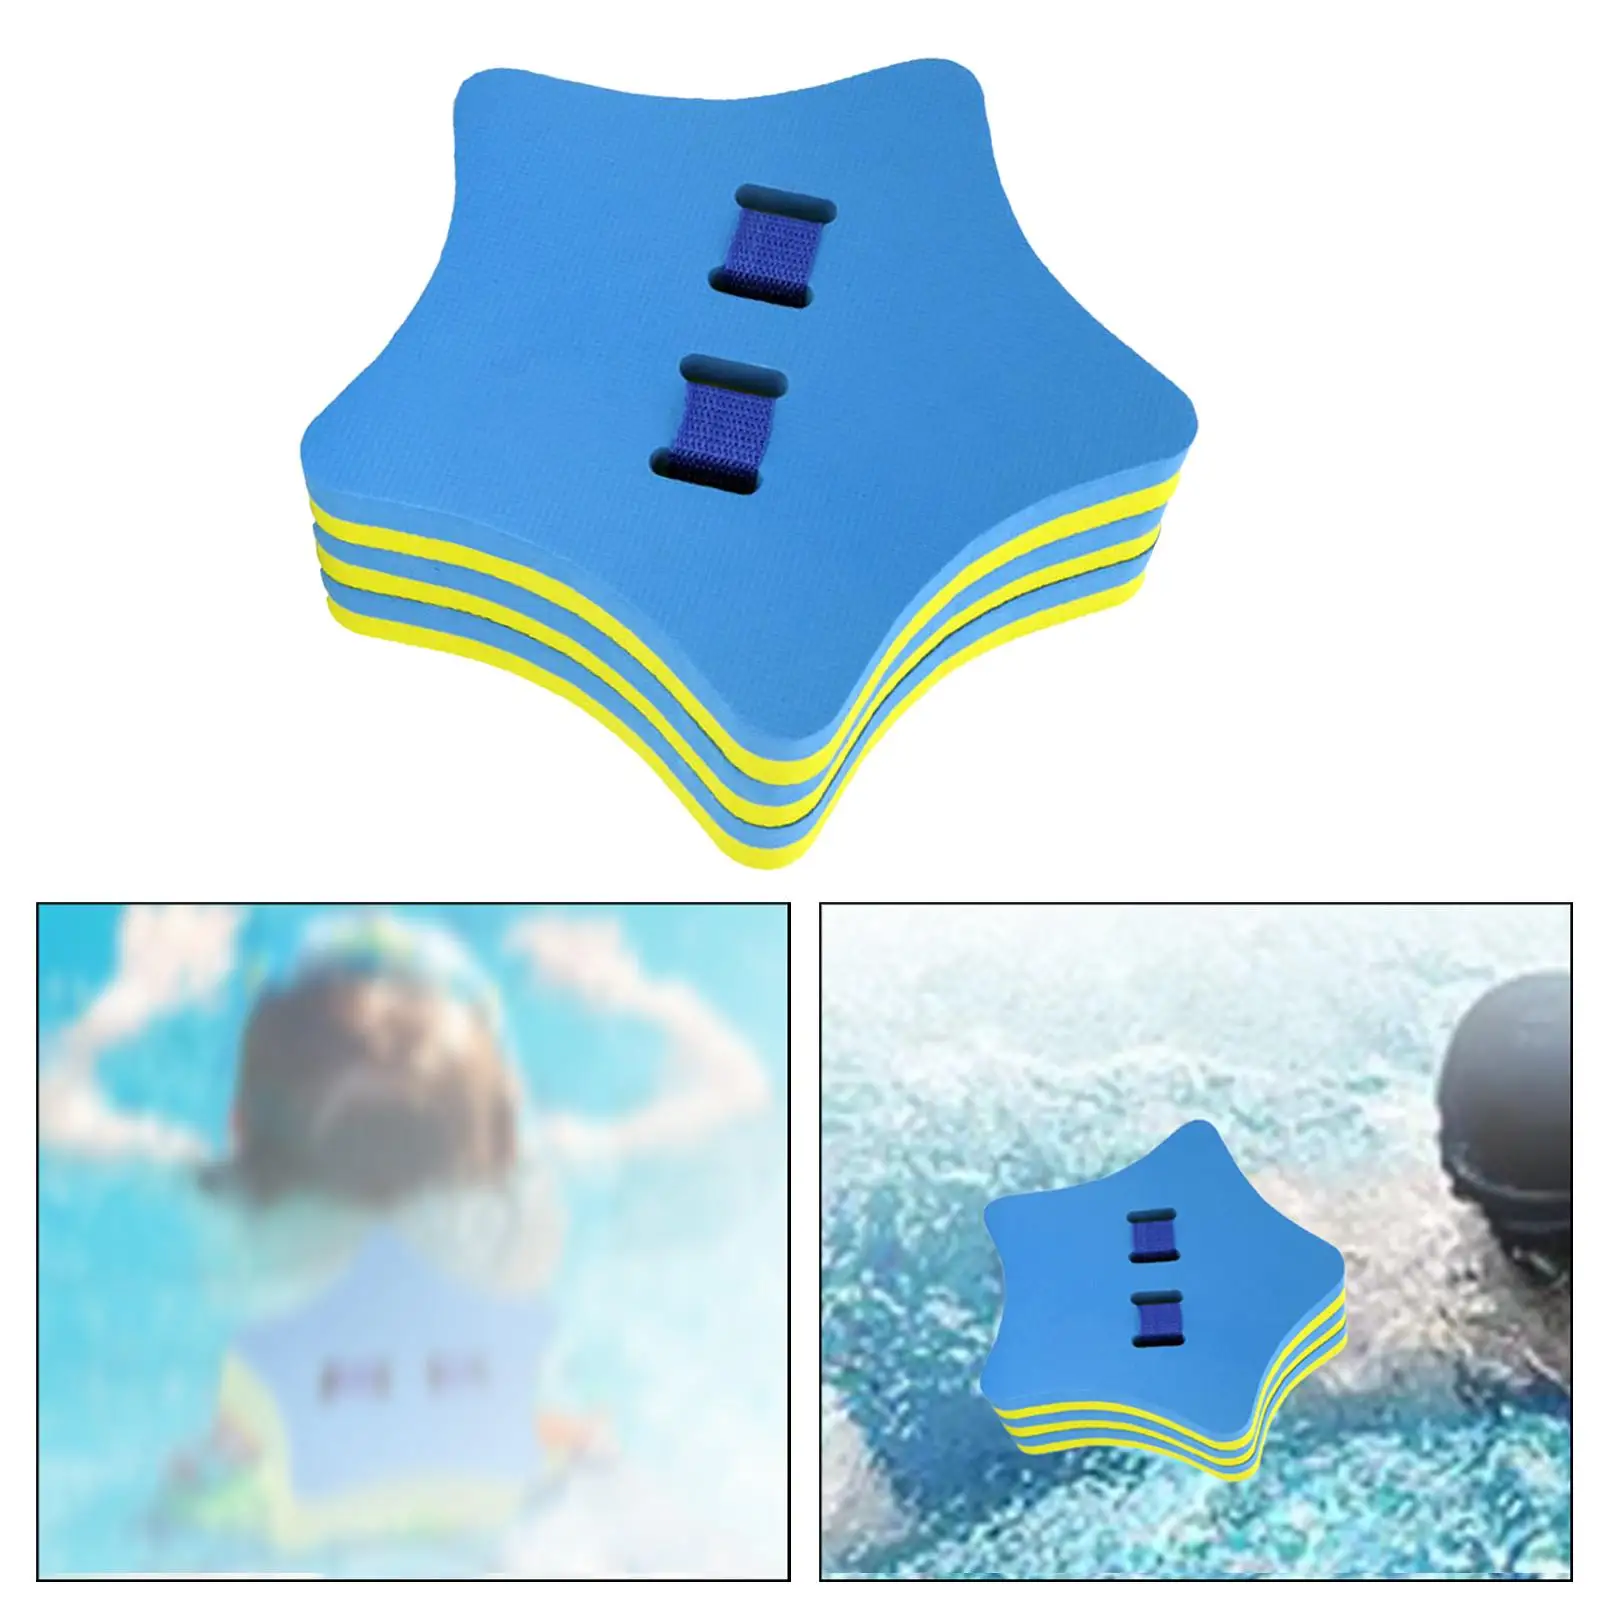 Adjustable Back foam floating Belt Waist Floating Board Safety Learn swimming Lightweight for Swimmers Pool Accessories